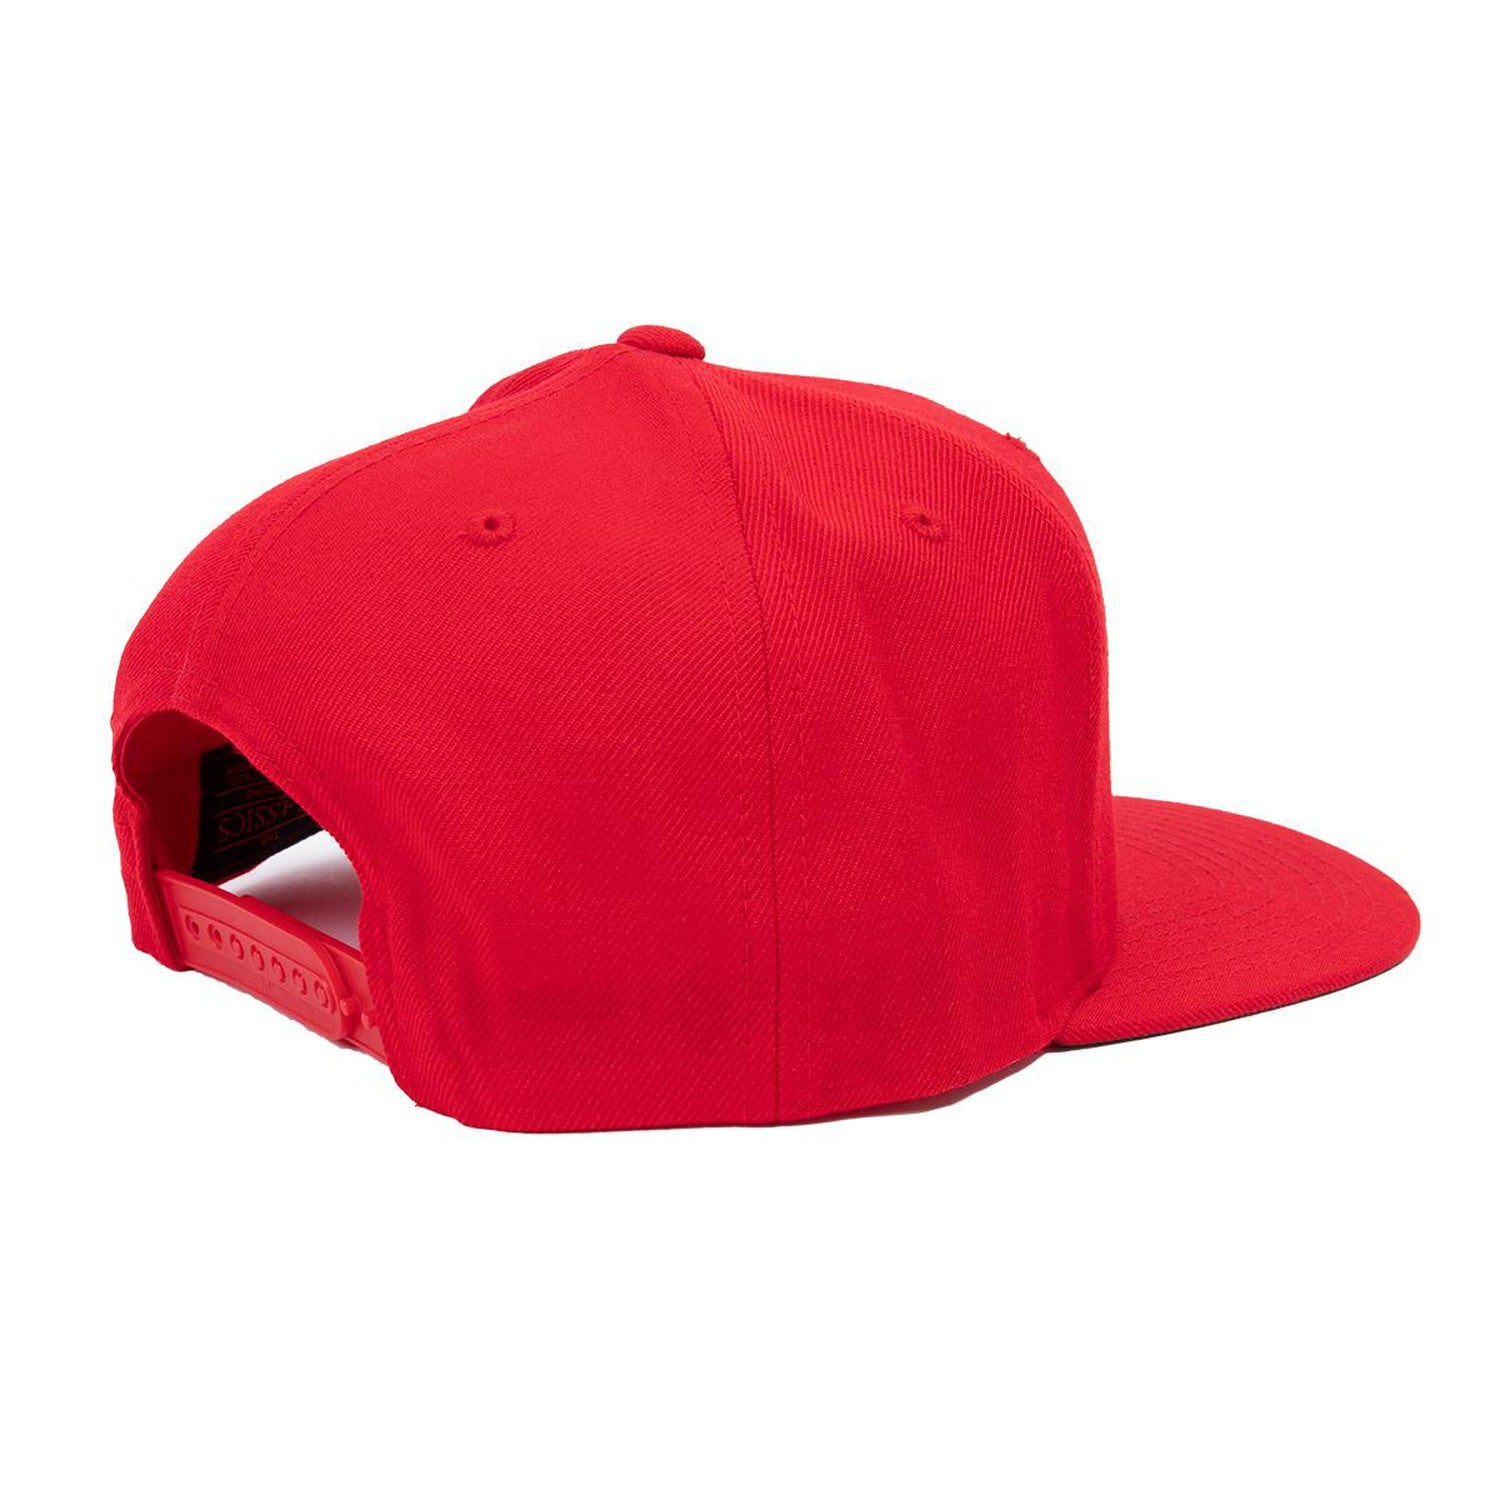 Million Dollaz Worth of Game Snapback Hat (Red)-Hats-Million Dollaz Worth of Game-One Size-Red-Barstool Sports